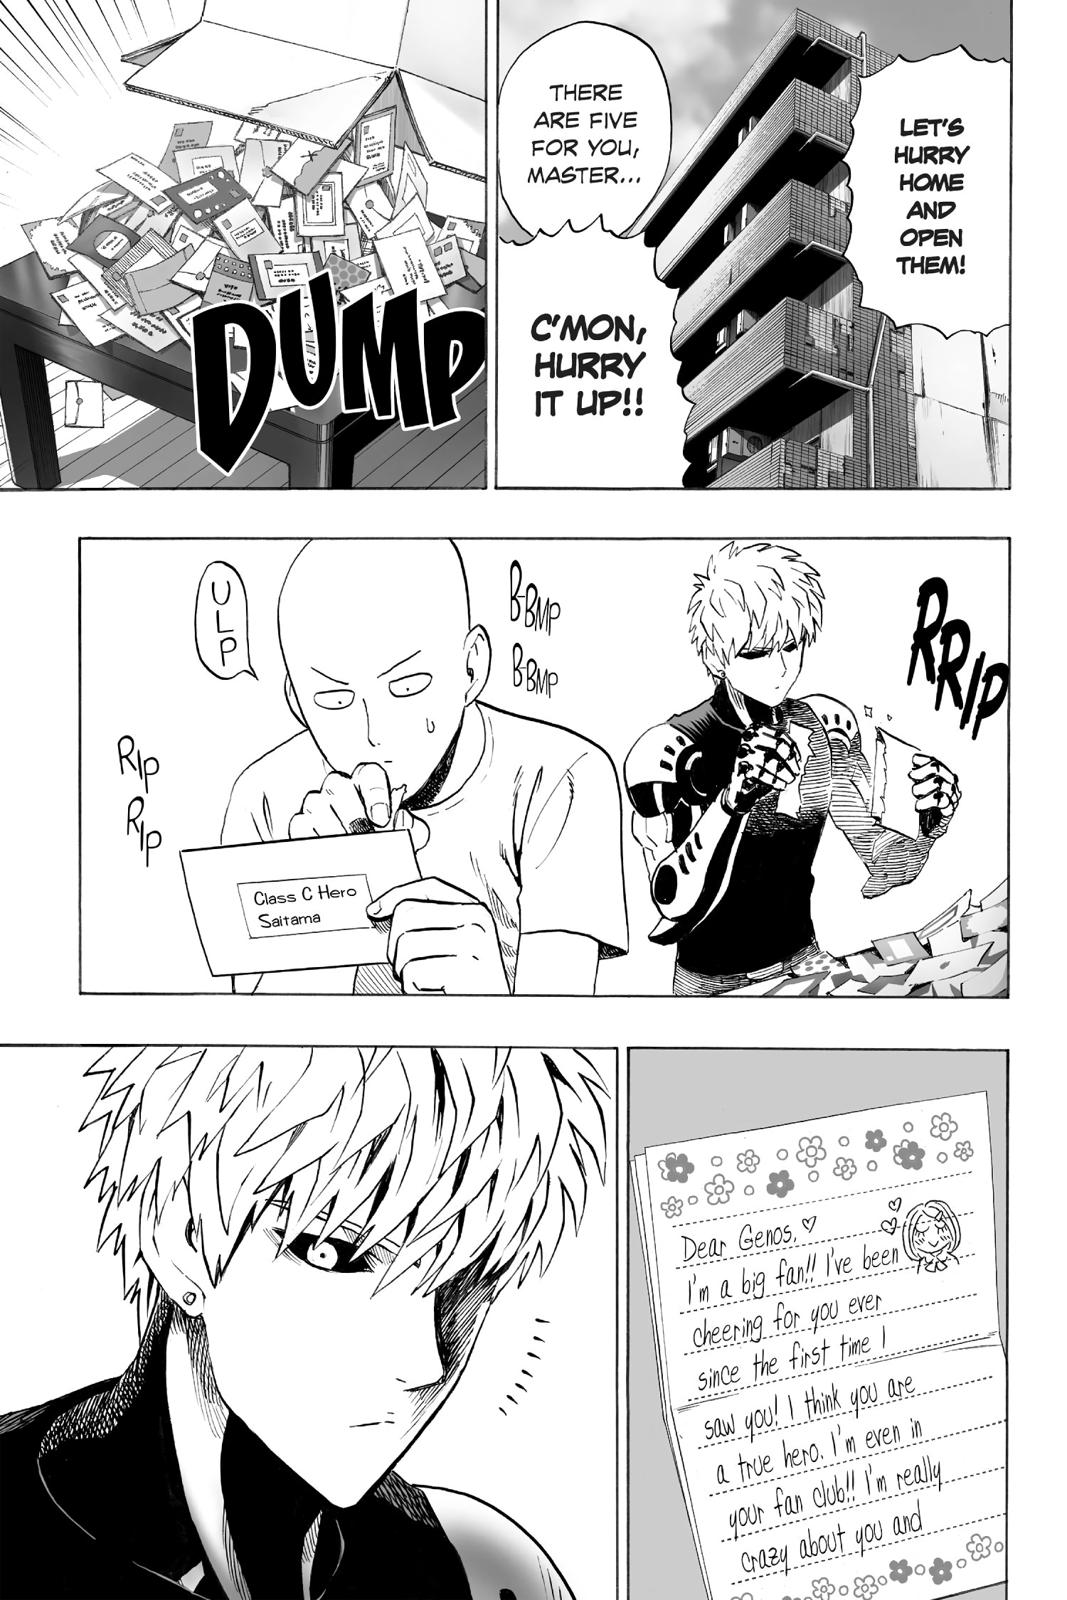 One-Punch Man, Punch 29 image 03